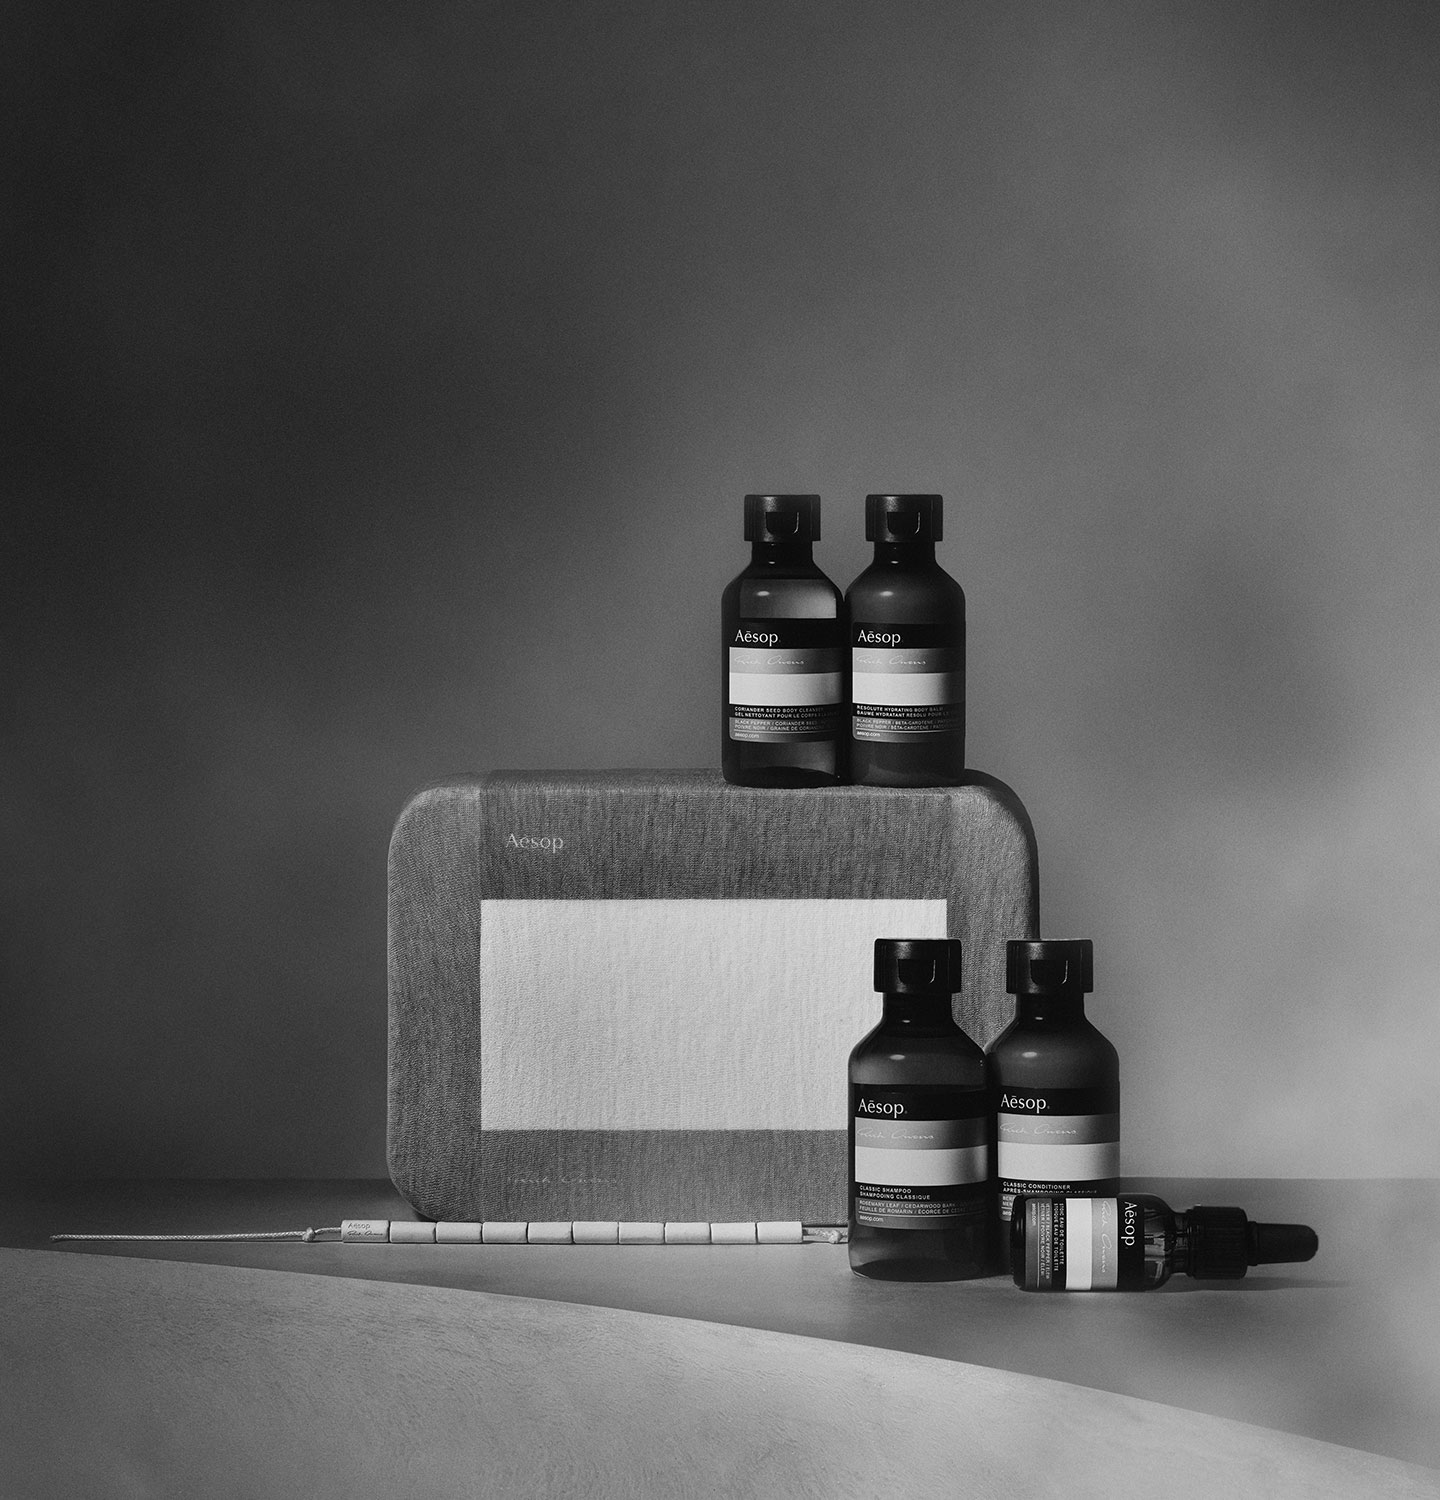 Aesop Rick Owens Travel Kit sitting on a concrete surface.